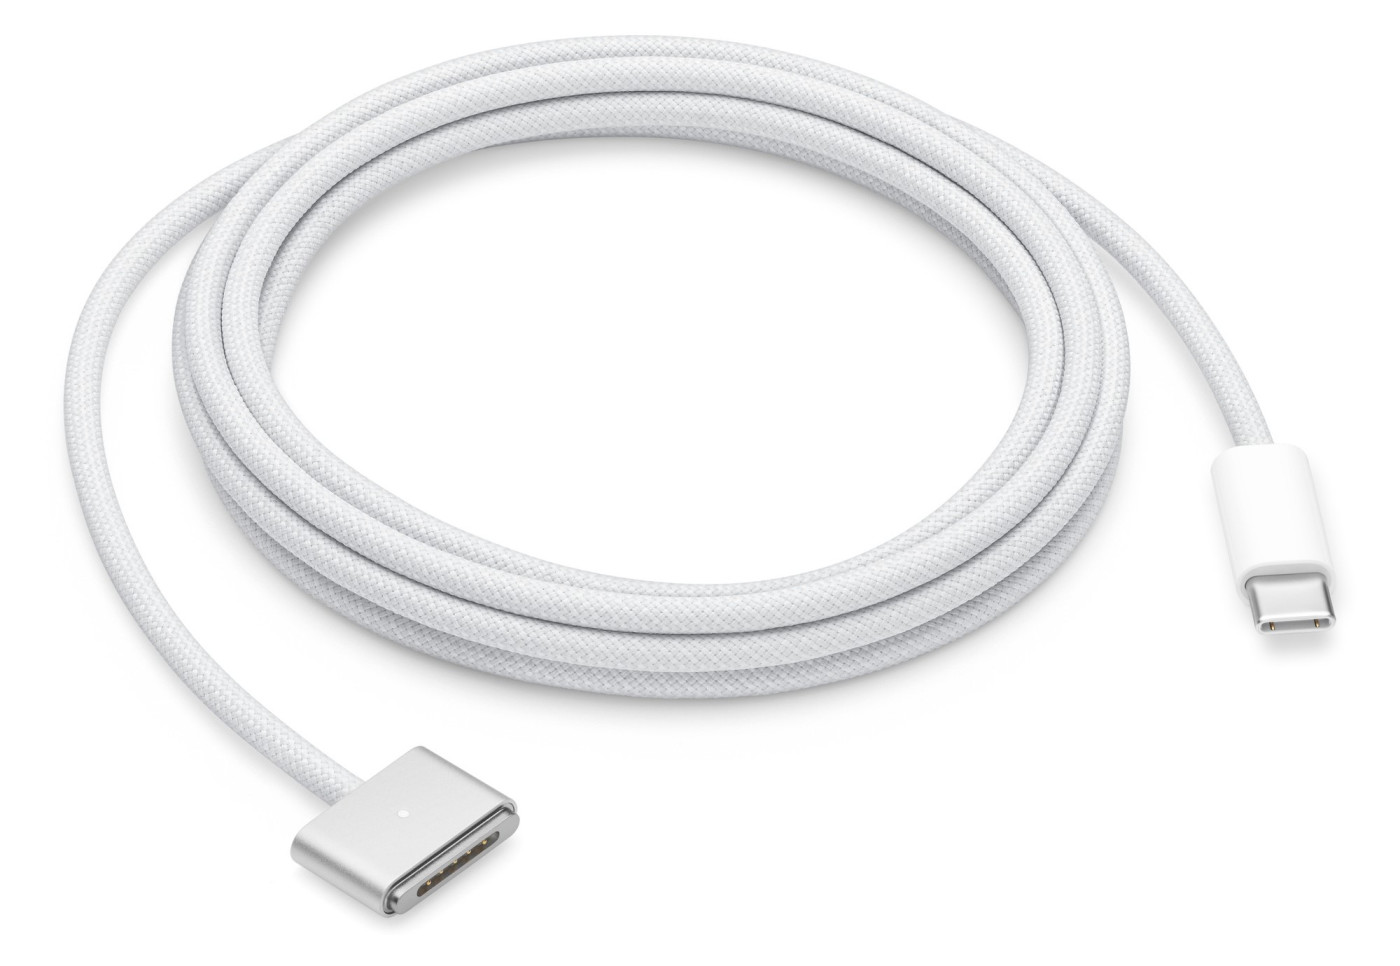 Apple updates the firmware of… its USB-C to MagSafe 3 cable